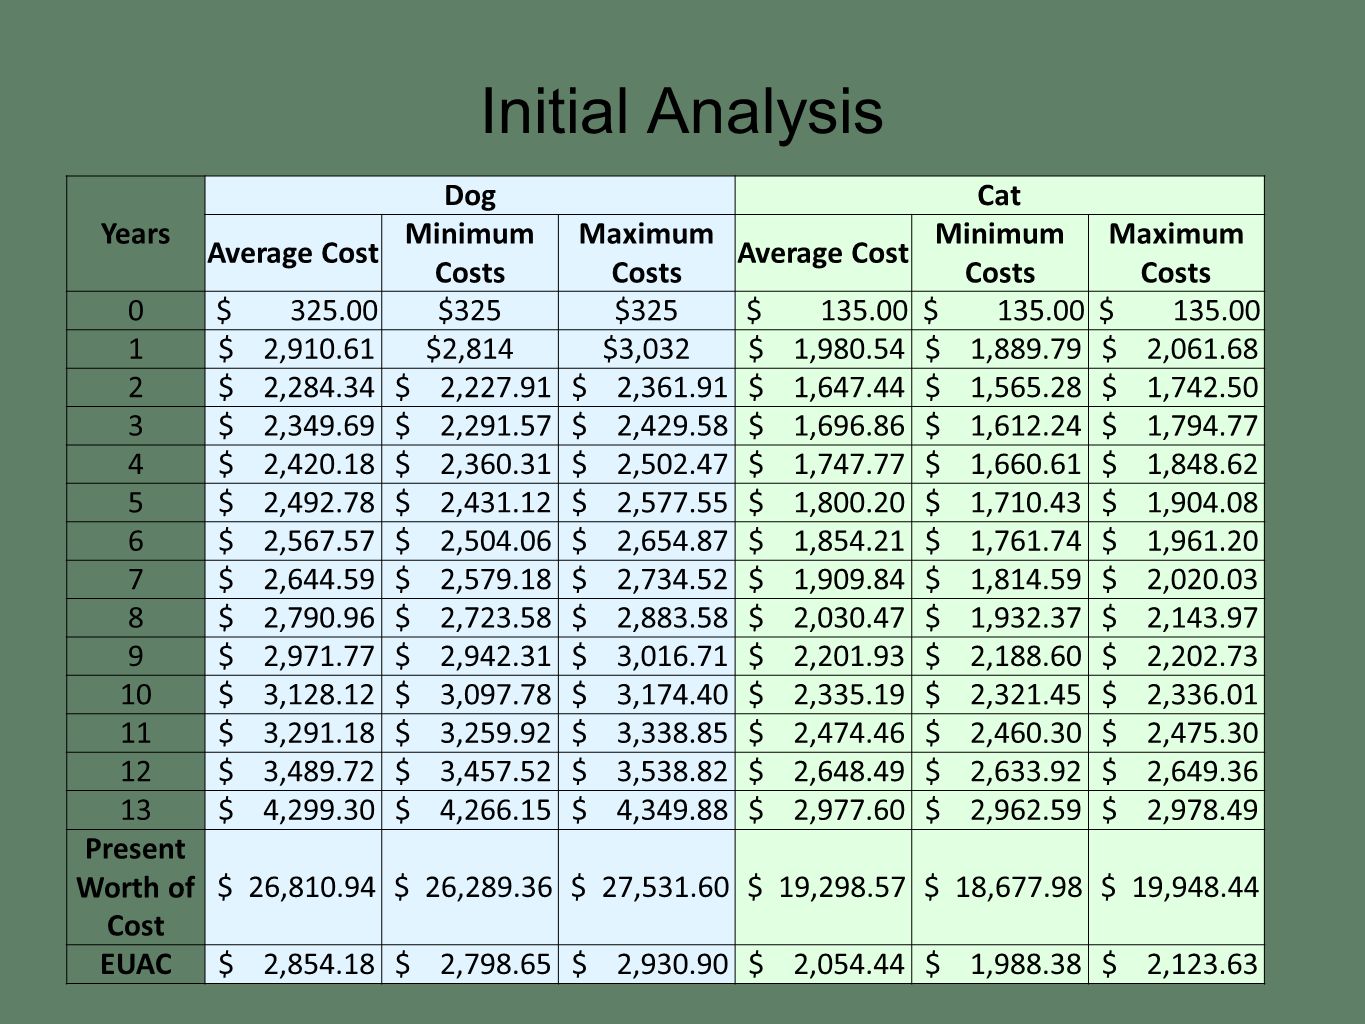 Initial Analysis Years DogCat Average Cost Minimum Costs Maximum Costs Average Cost Minimum Costs Maximum Costs 0 $ $325 $ $ 2,910.61$2,814$3,032 $ 1, $ 1, $ 2, $ 2, $ 2, $ 2, $ 1, $ 1, $ 1, $ 2, $ 2, $ 2, $ 1, $ 1, $ 1, $ 2, $ 2, $ 2, $ 1, $ 1, $ 1, $ 2, $ 2, $ 2, $ 1, $ 1, $ 1, $ 2, $ 2, $ 2, $ 1, $ 1, $ 1, $ 2, $ 2, $ 2, $ 1, $ 1, $ 2, $ 2, $ 2, $ 2, $ 2, $ 1, $ 2, $ 2, $ 2, $ 3, $ 2, $ 2, $ 2, $ 3, $ 3, $ 3, $ 2, $ 2, $ 2, $ 3, $ 3, $ 3, $ 2, $ 2, $ 2, $ 3, $ 3, $ 3, $ 2, $ 2, $ 2, $ 4, $ 4, $ 4, $ 2, $ 2, $ 2, Present Worth of Cost $ 26, $ 26, $ 27, $ 19, $ 18, $ 19, EUAC $ 2, $ 2, $ 2, $ 2, $ 1, $ 2,123.63